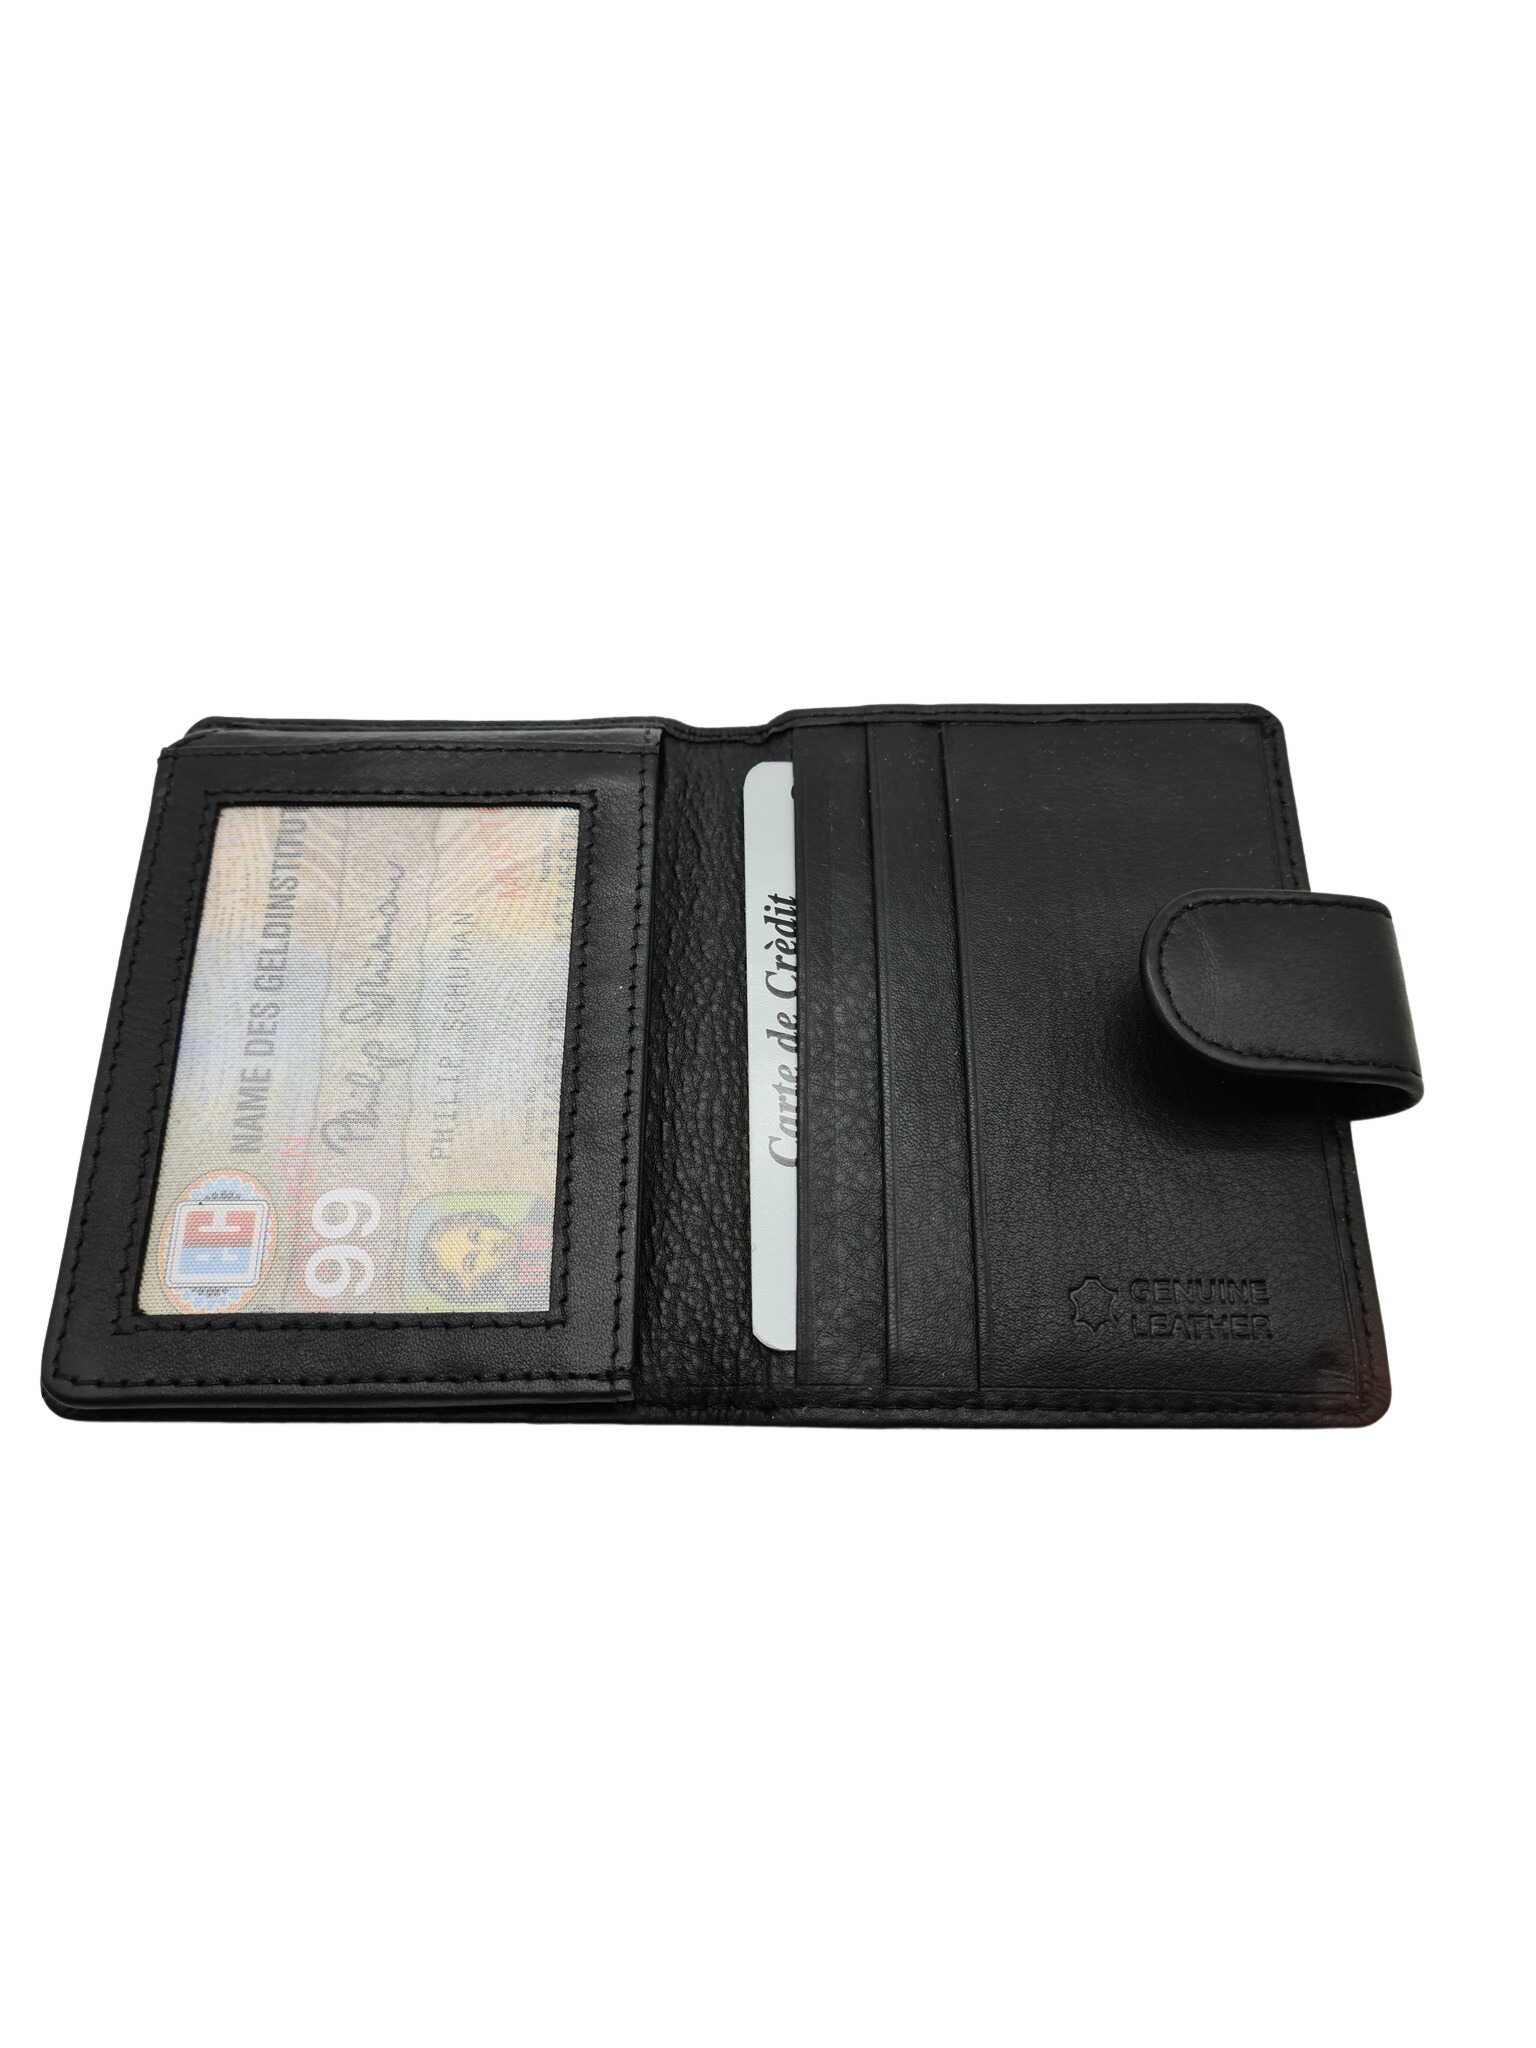 Men genuine leather card wallet 15 card slot and 1 note compartment black color